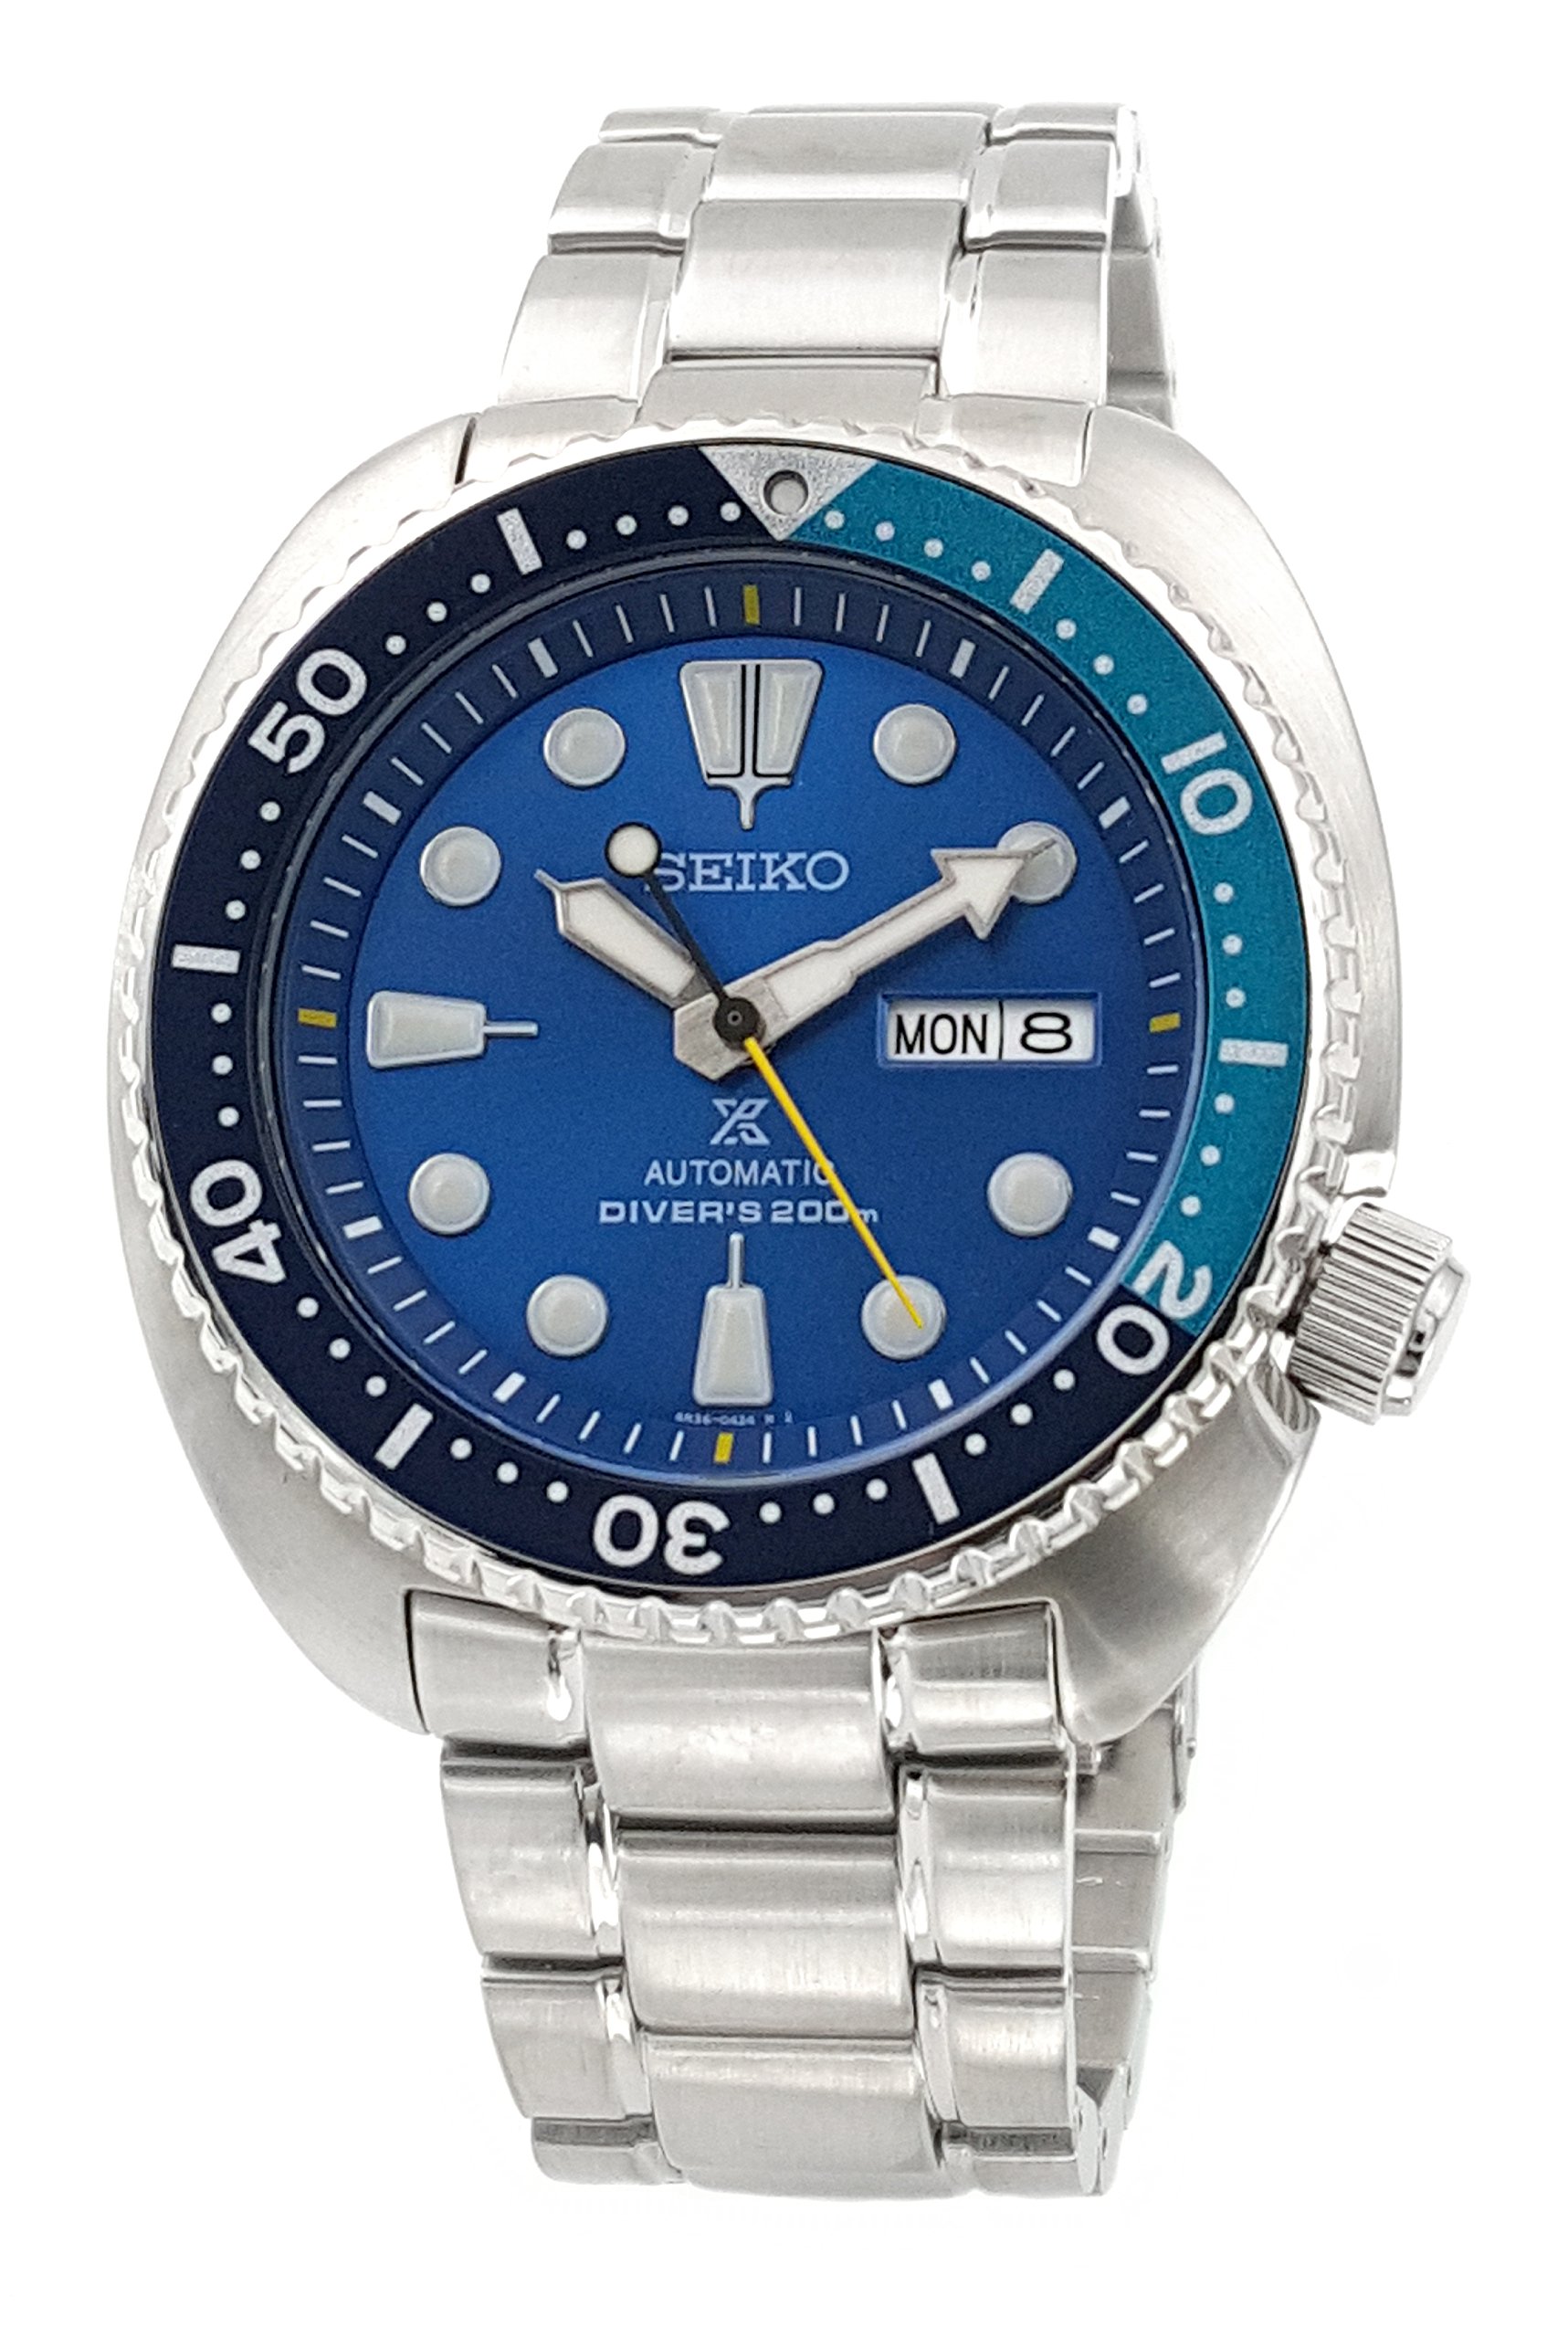 Seiko Prospex Blue Lagoon Turtle Limited Edition Divers Automatic Men's Watch SRPB11